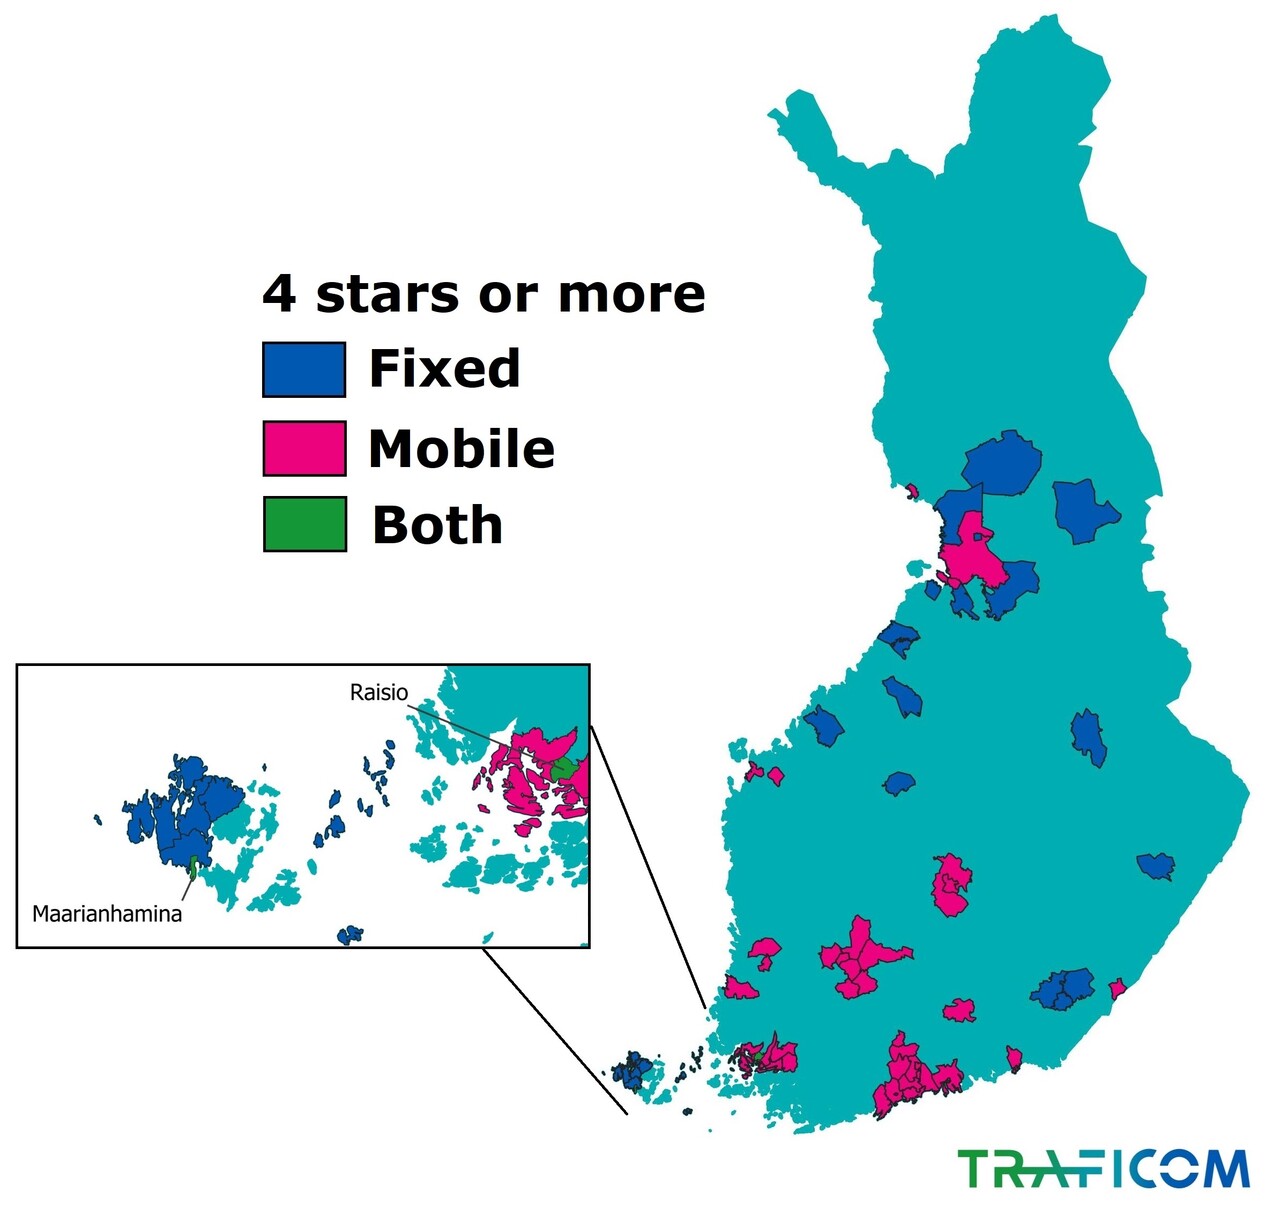 Finland has two municipalities, Maarianhamina and Raisio, where the star rating of both fixed and mobile connections is at least 4 stars.